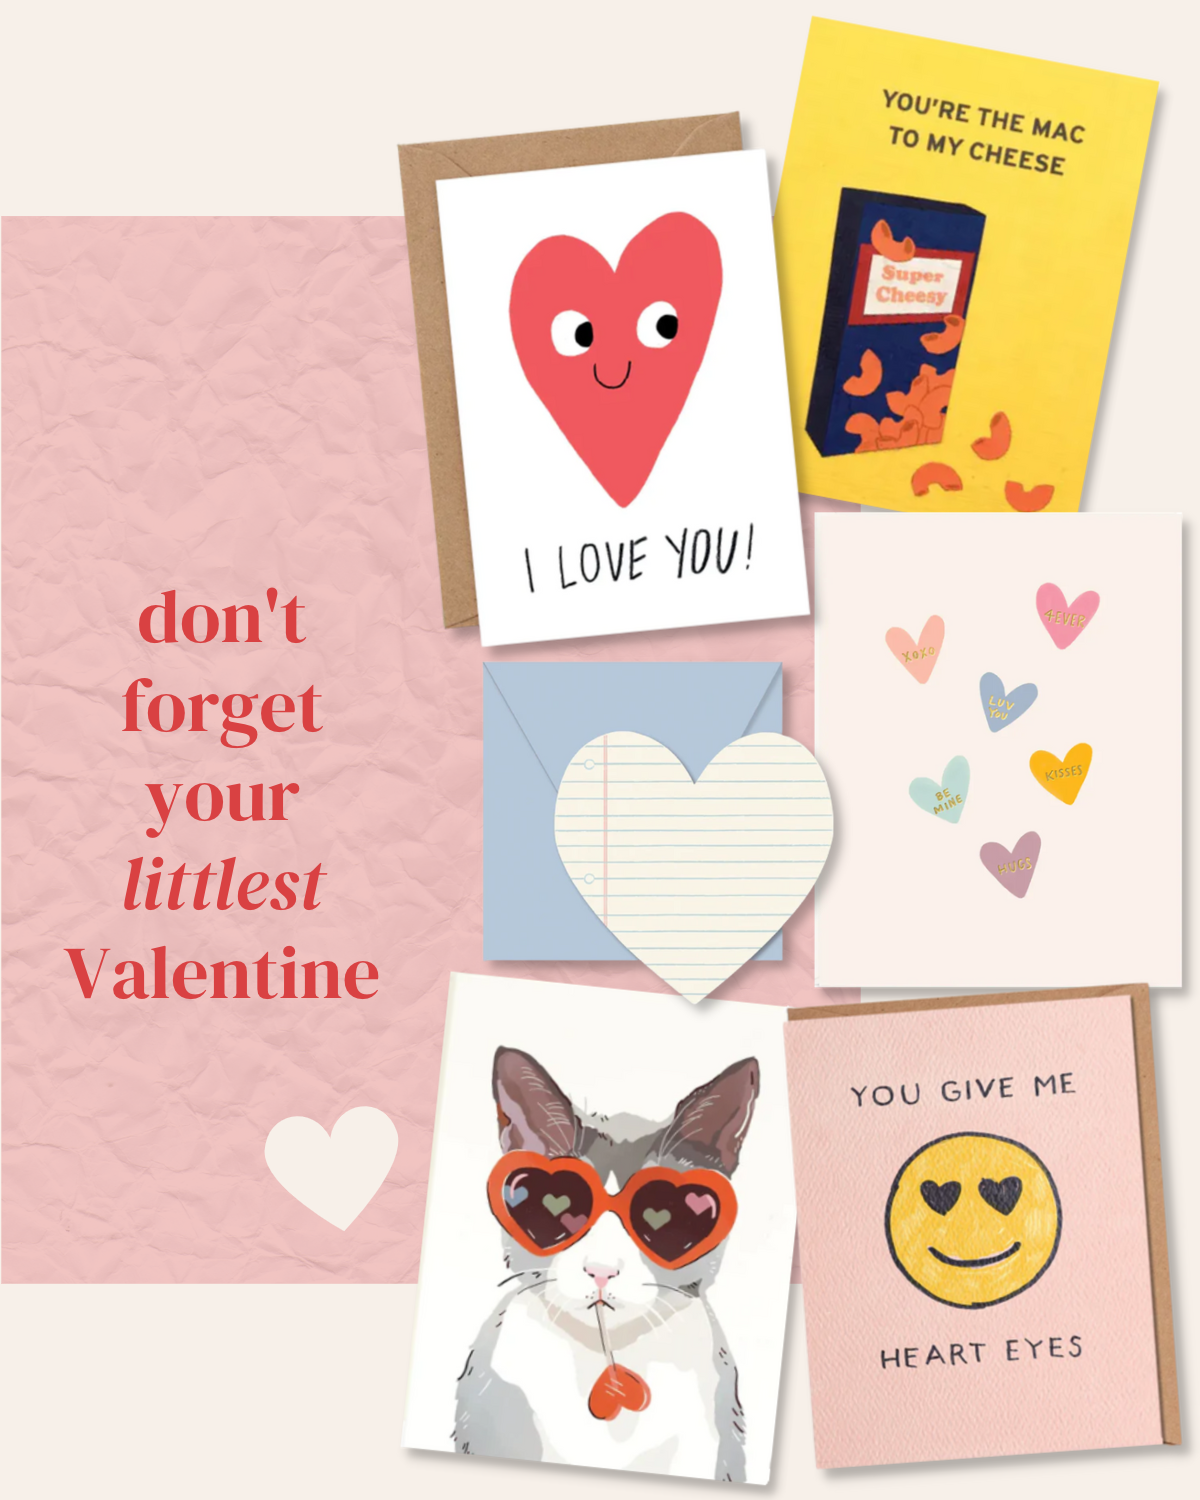 urbanic paper boutique los angeles california gifts stationery valentine for kids little children smiley cat hearts mac and cheese